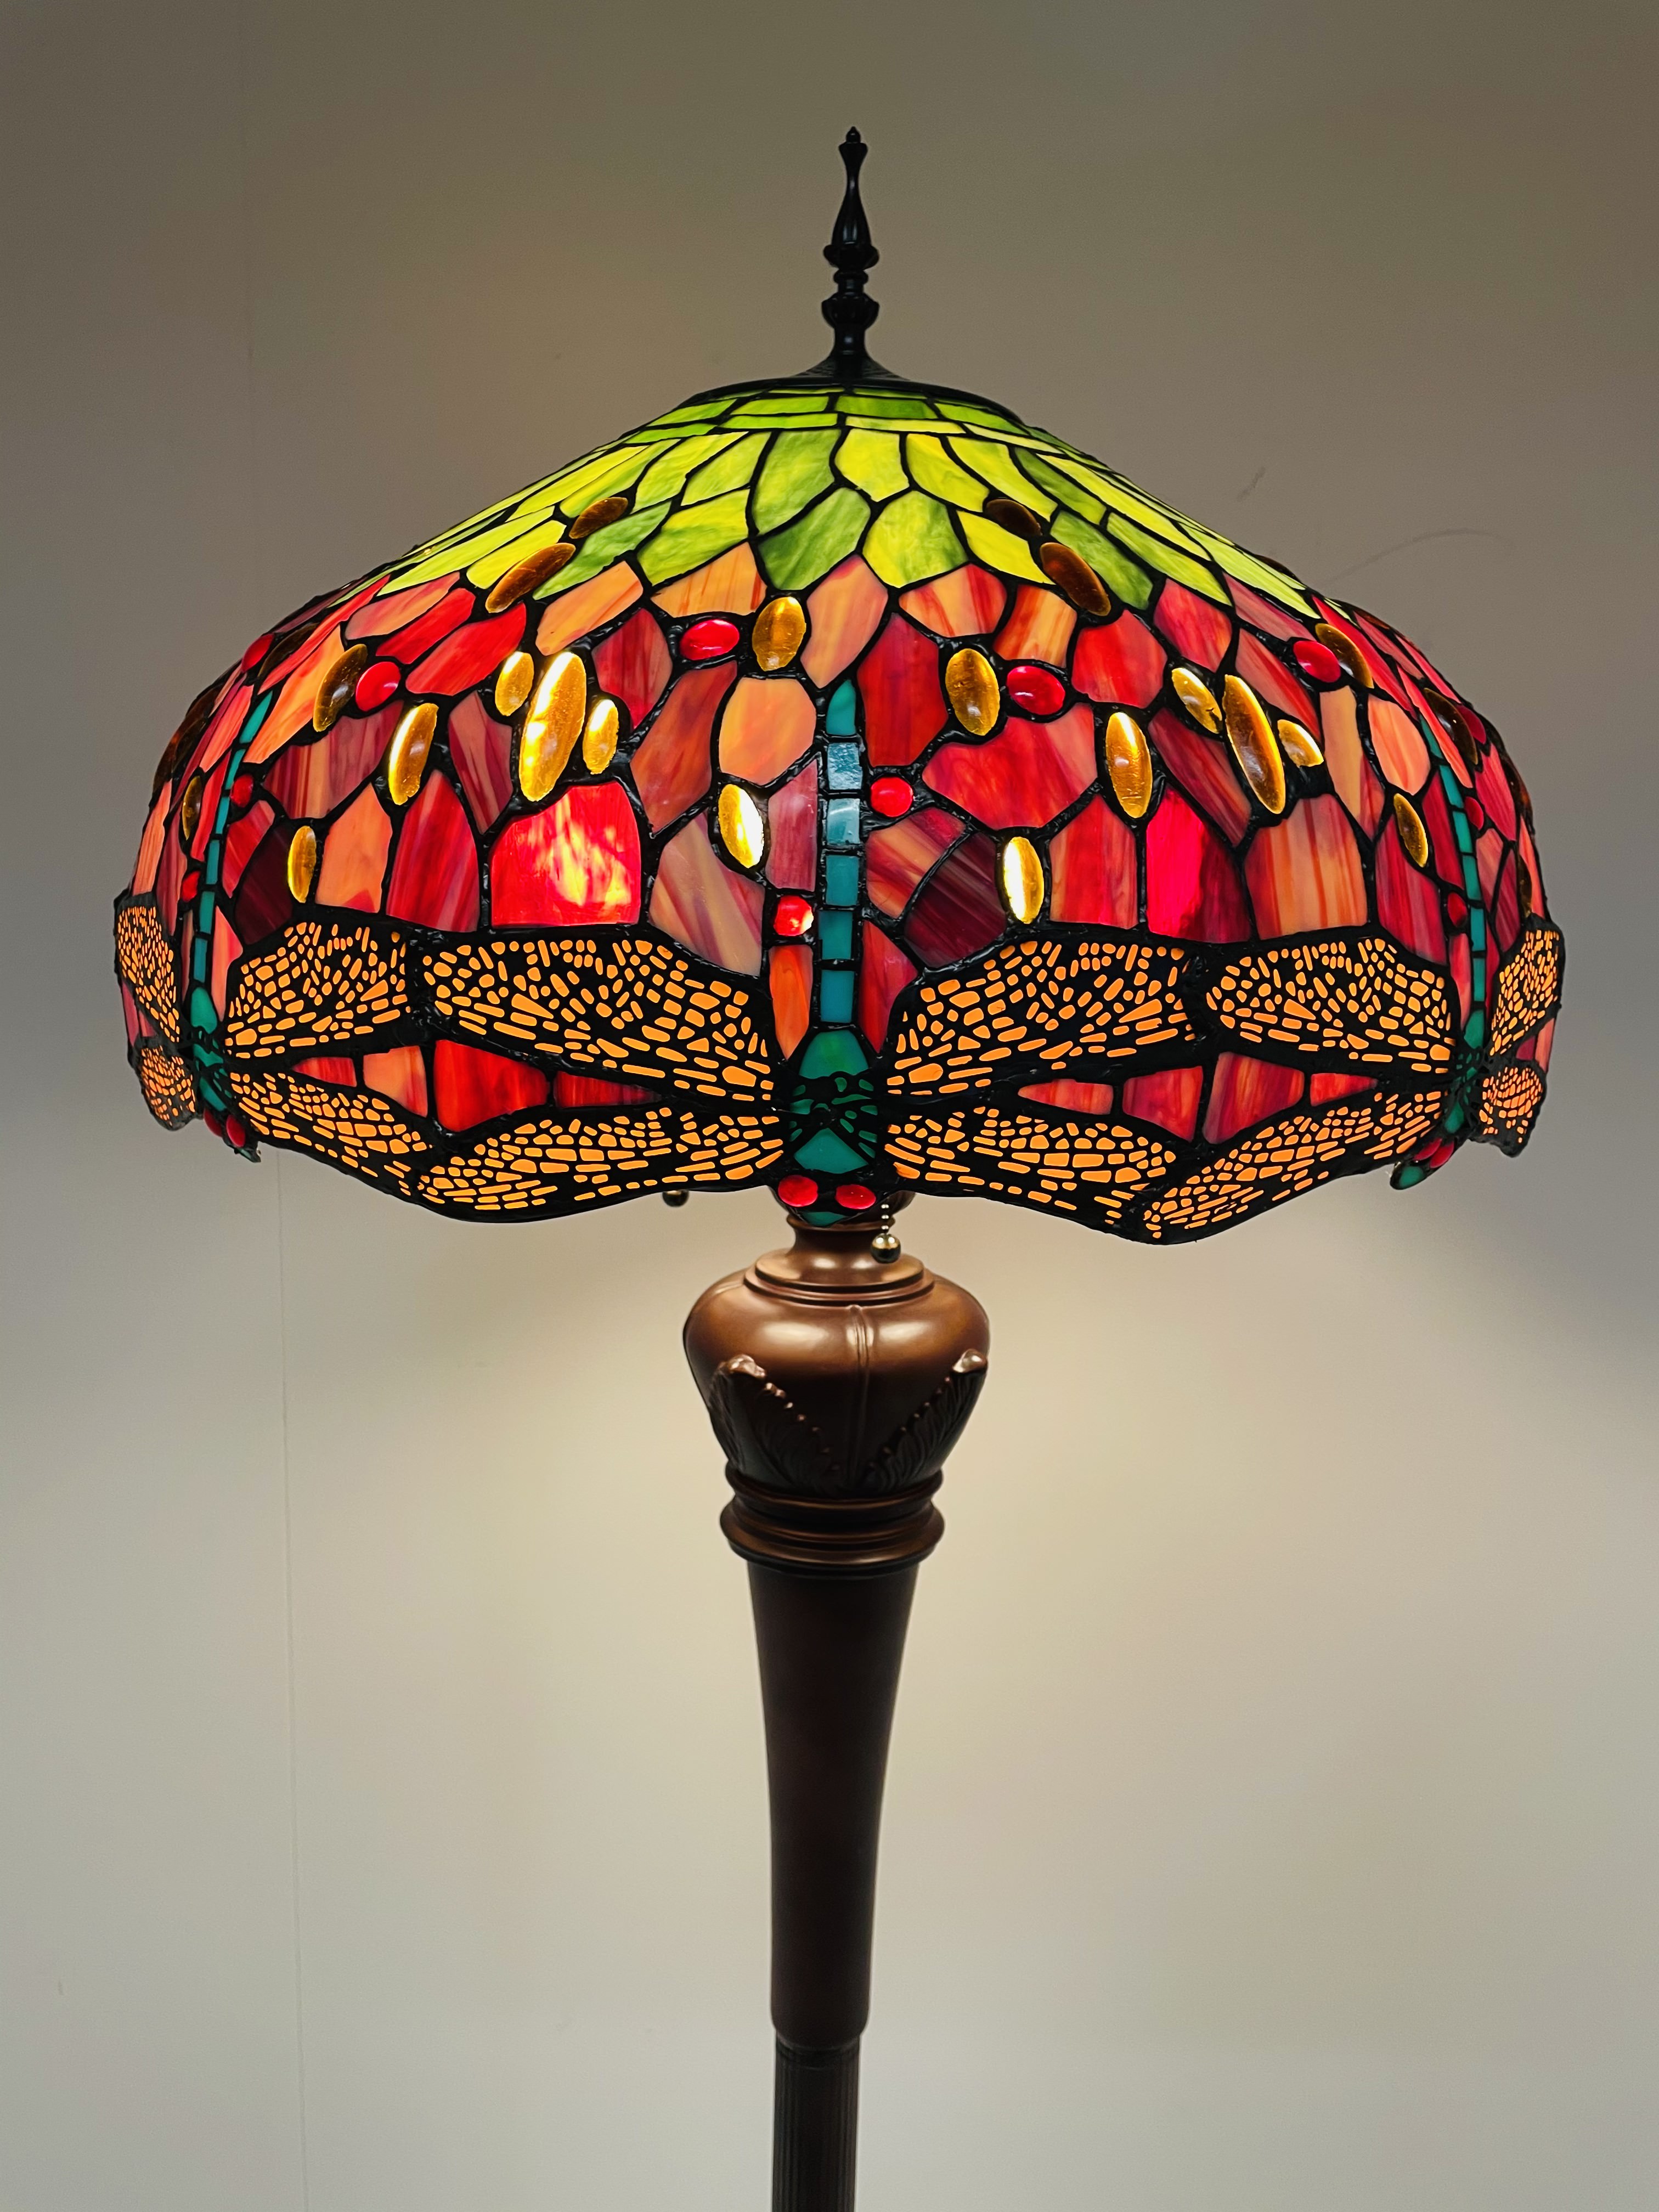 Tiffany Stehleuchte Dragonfly 60cm de Luxe